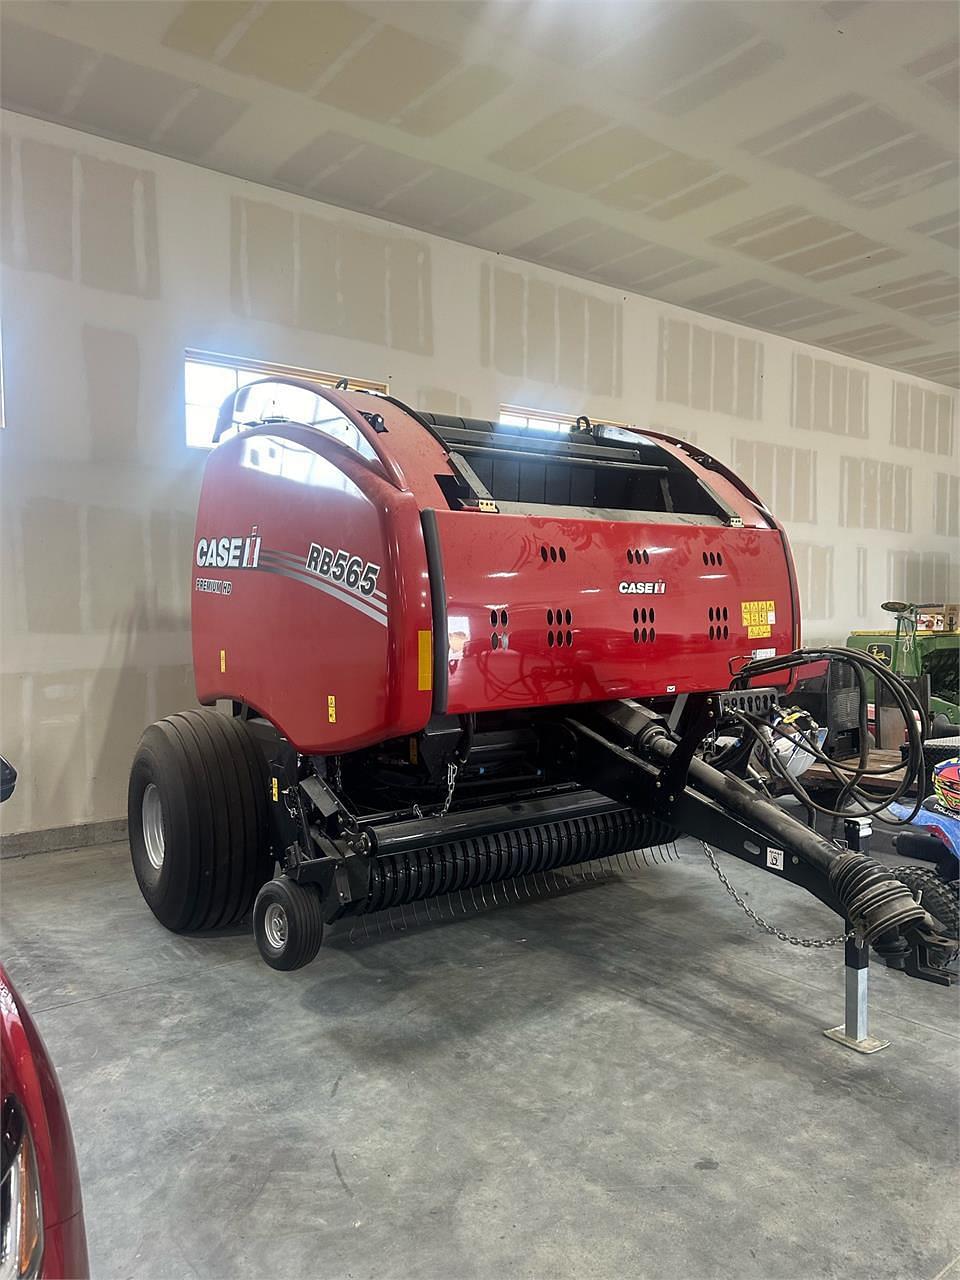 Image of Case IH RB565 Primary image